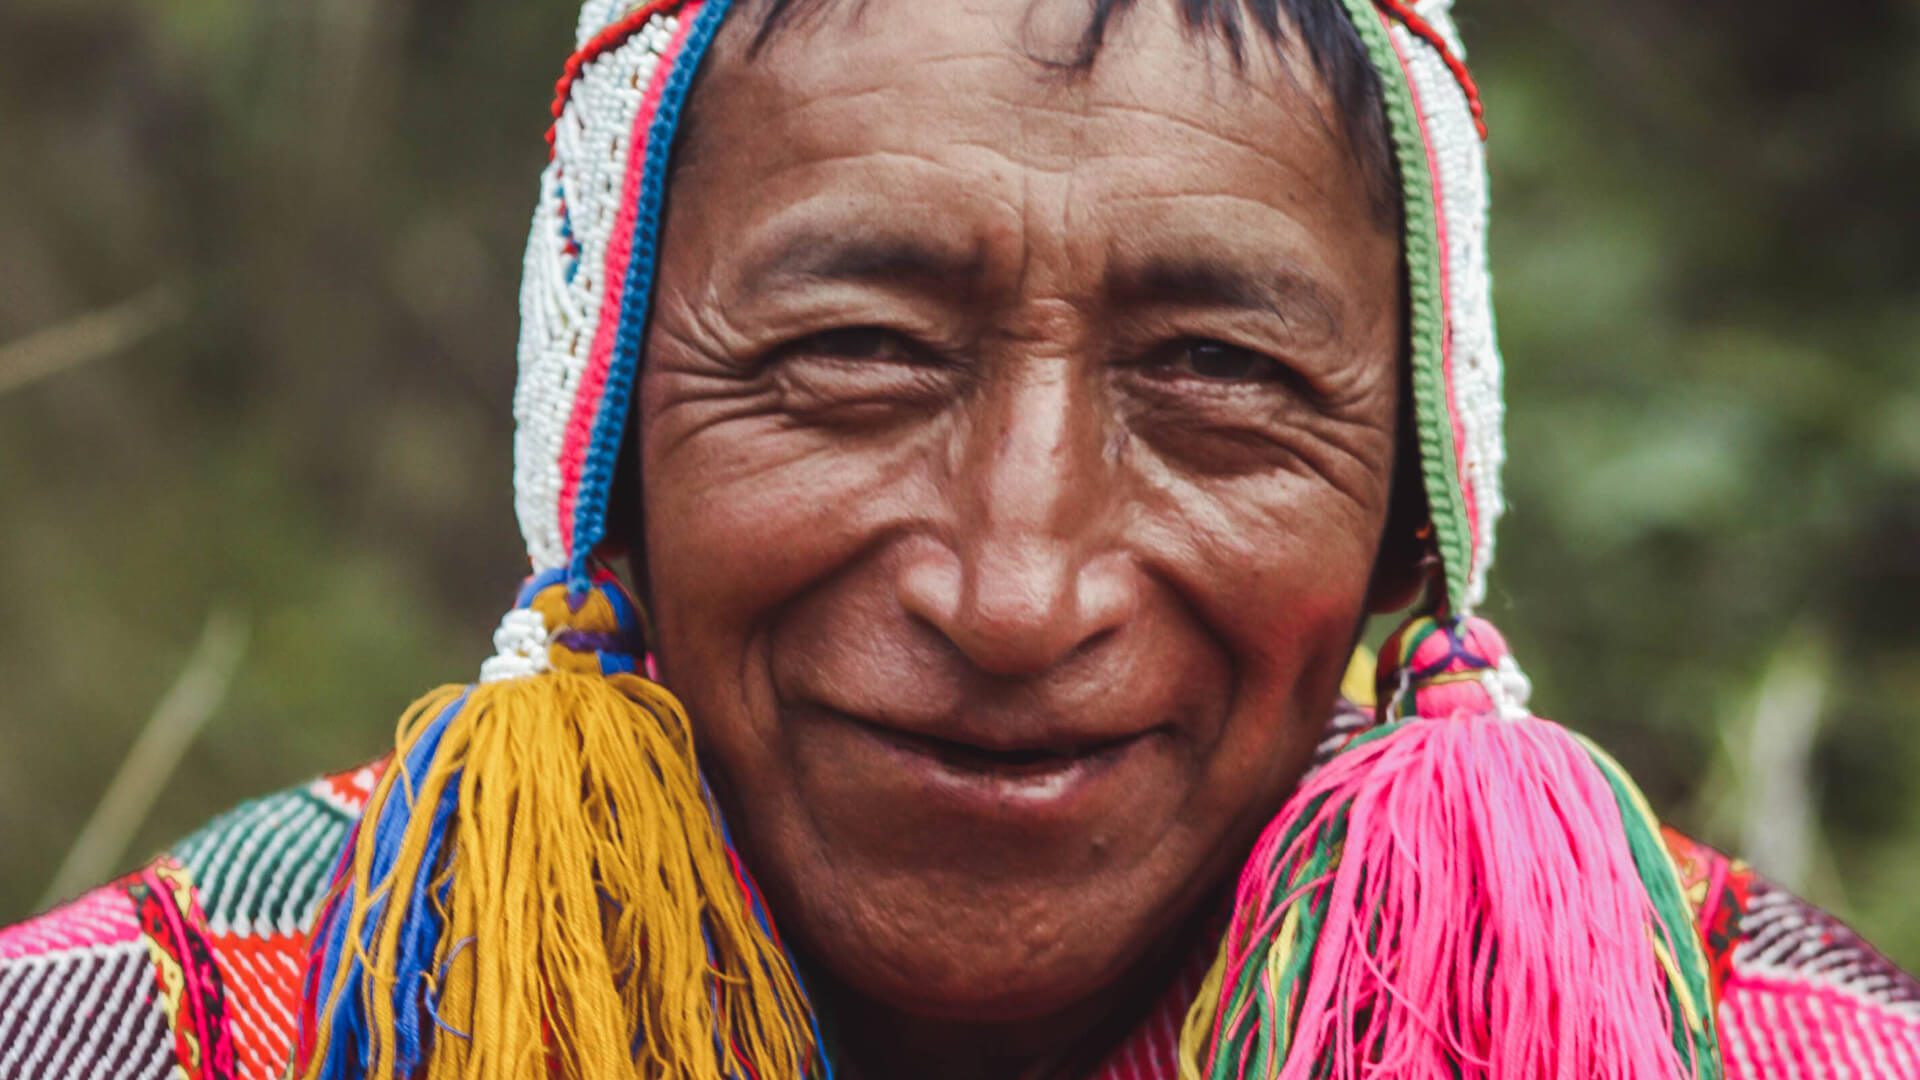 You will meet the “maestros” Paqo Qero, who will teach you about the Inca worldview and explain the ceremonies.